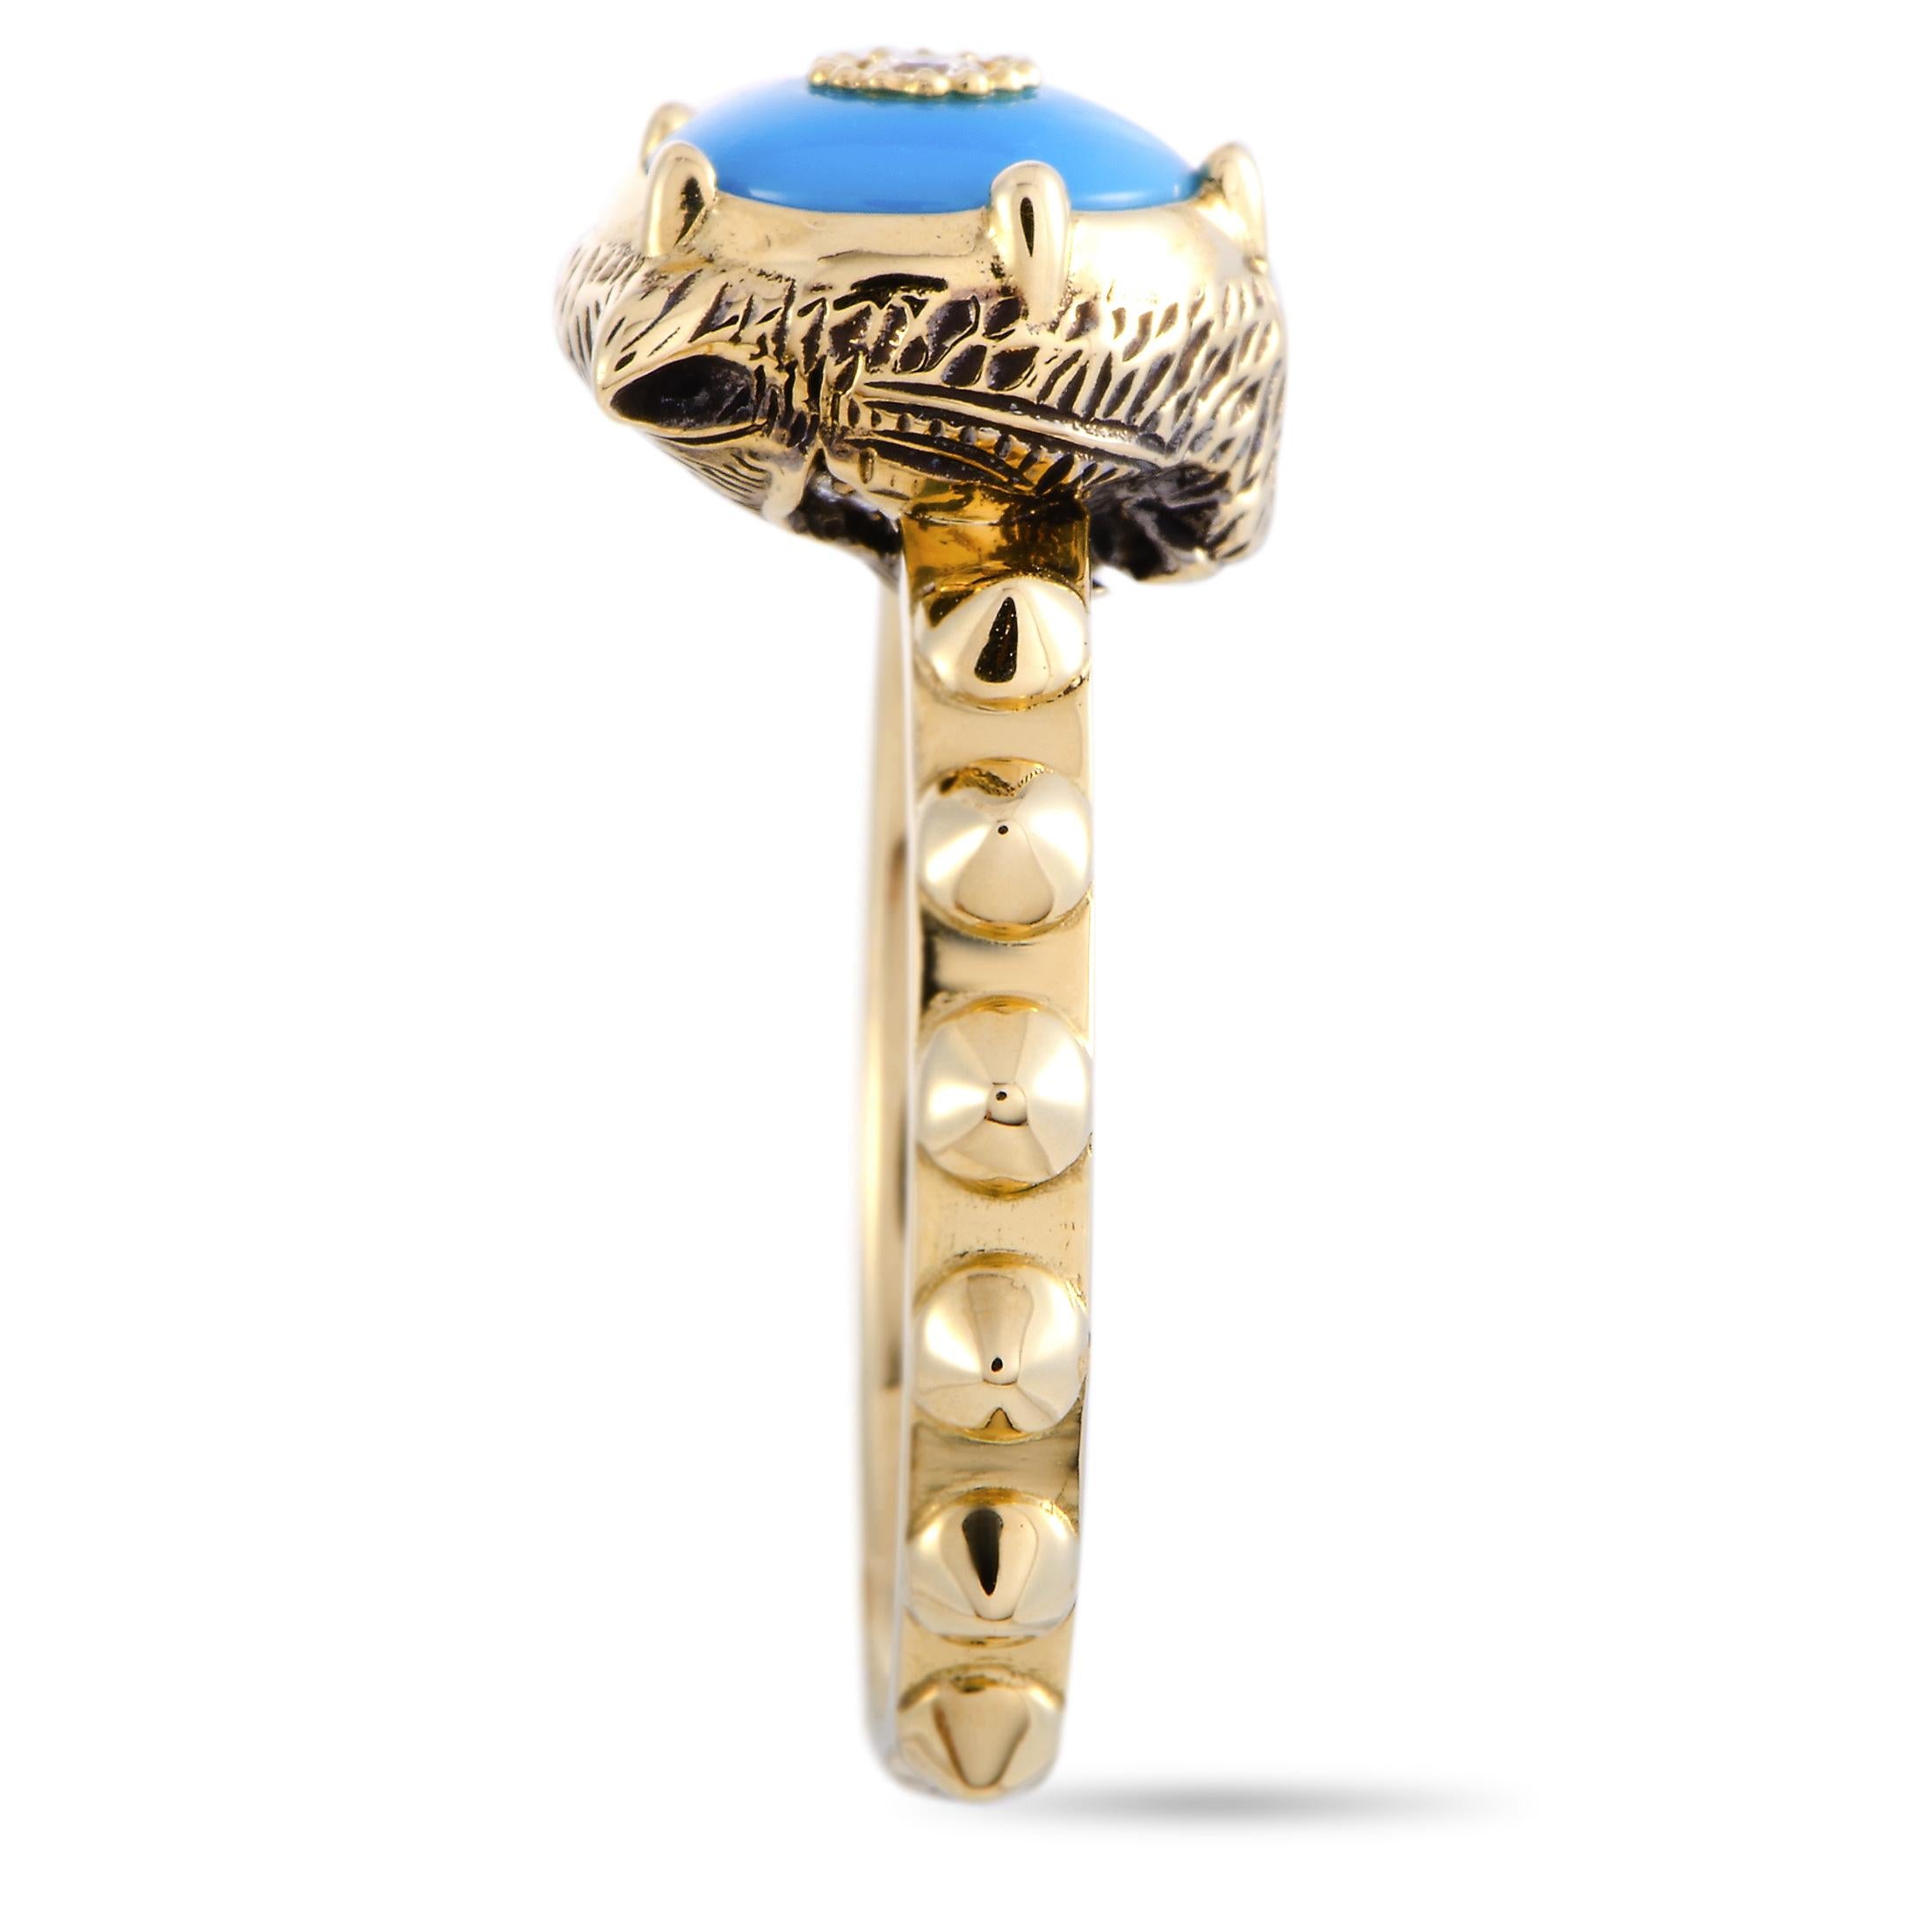 The “Le Marché des Merveilles” ring by Gucci is crafted from 18K yellow gold and set with a turquoise and three diamond stones. The turquoise weighs approximately 1.15 carats and the diamonds boast GH color and VVS clarity and amount to